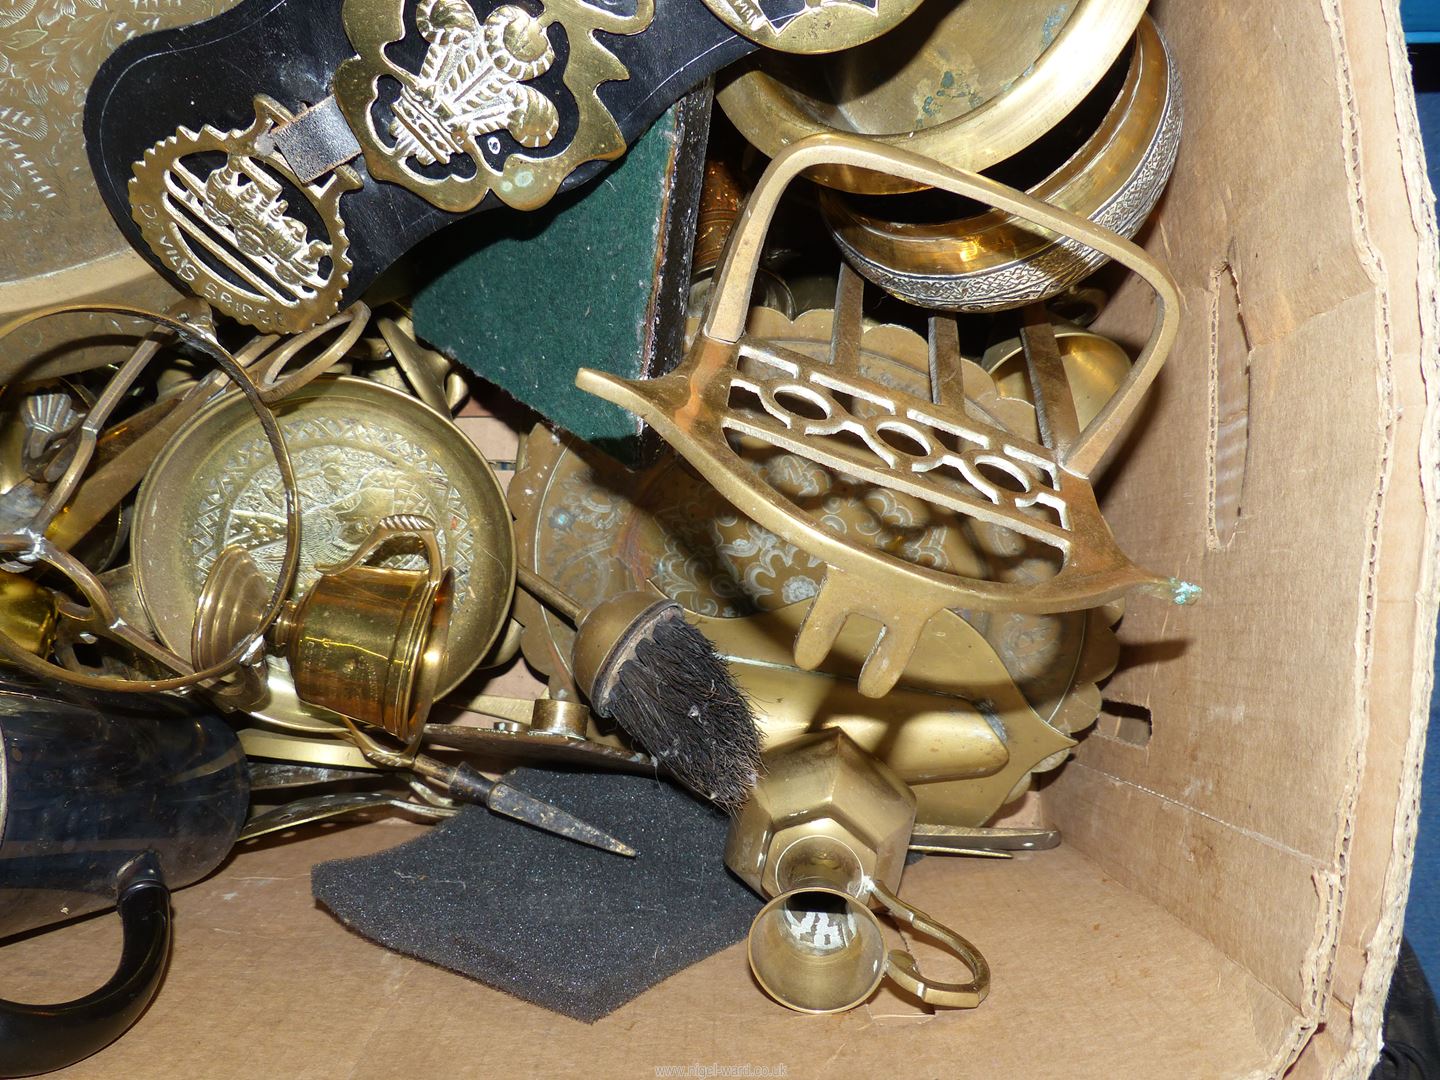 A good quantity of brass and plate including companion set, hot water jug, horse brasses, - Image 3 of 3